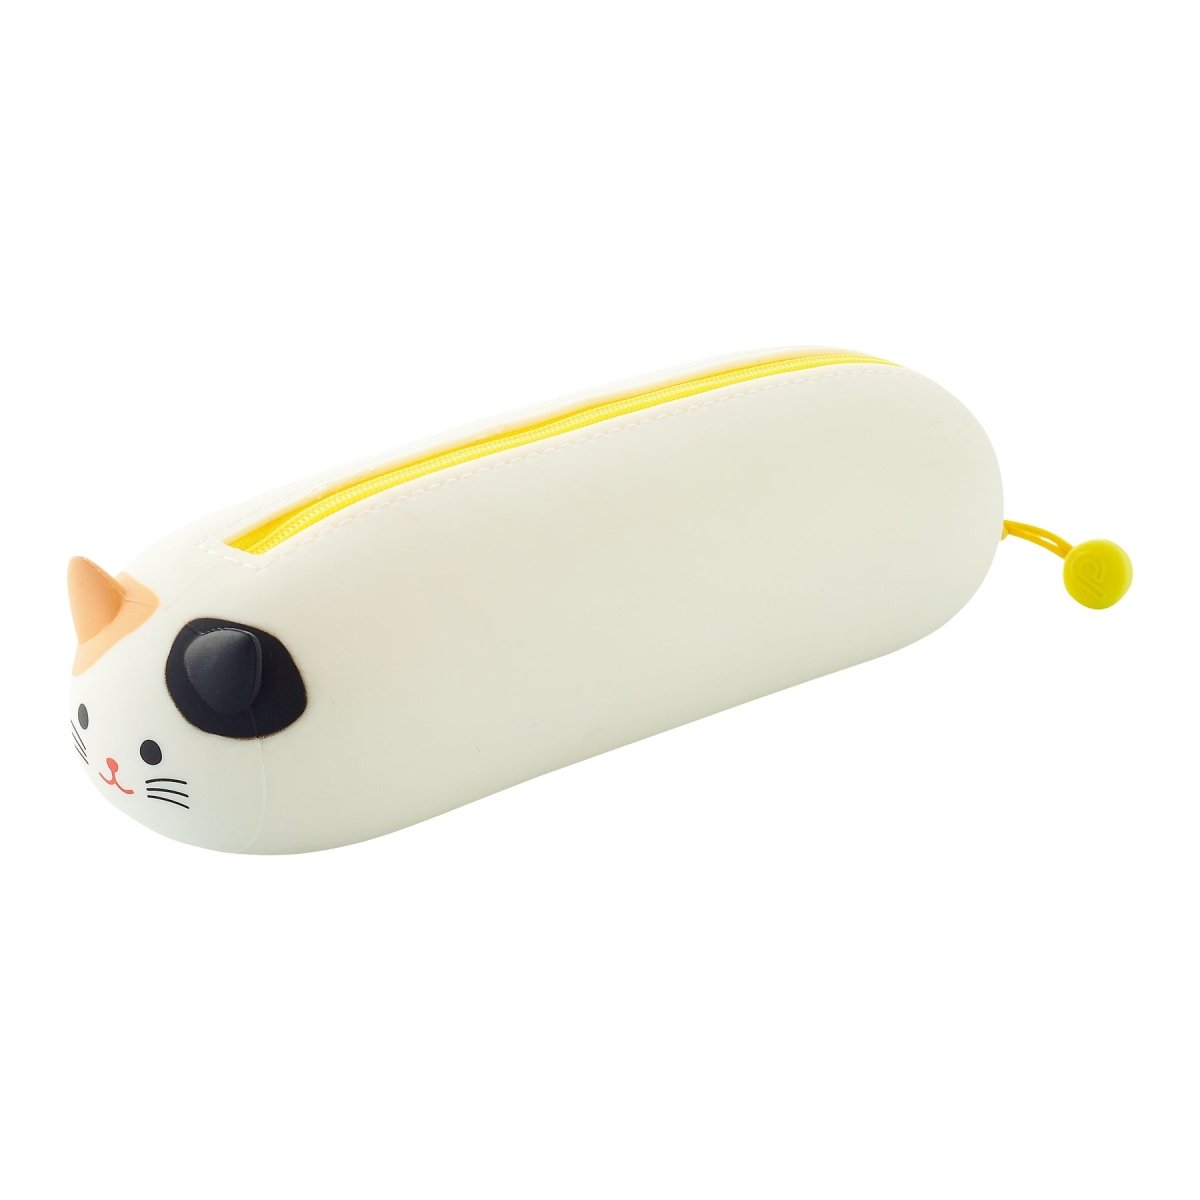 Punilabo Lying Down Zipper Pouch - Calico Cat - merriartist.com